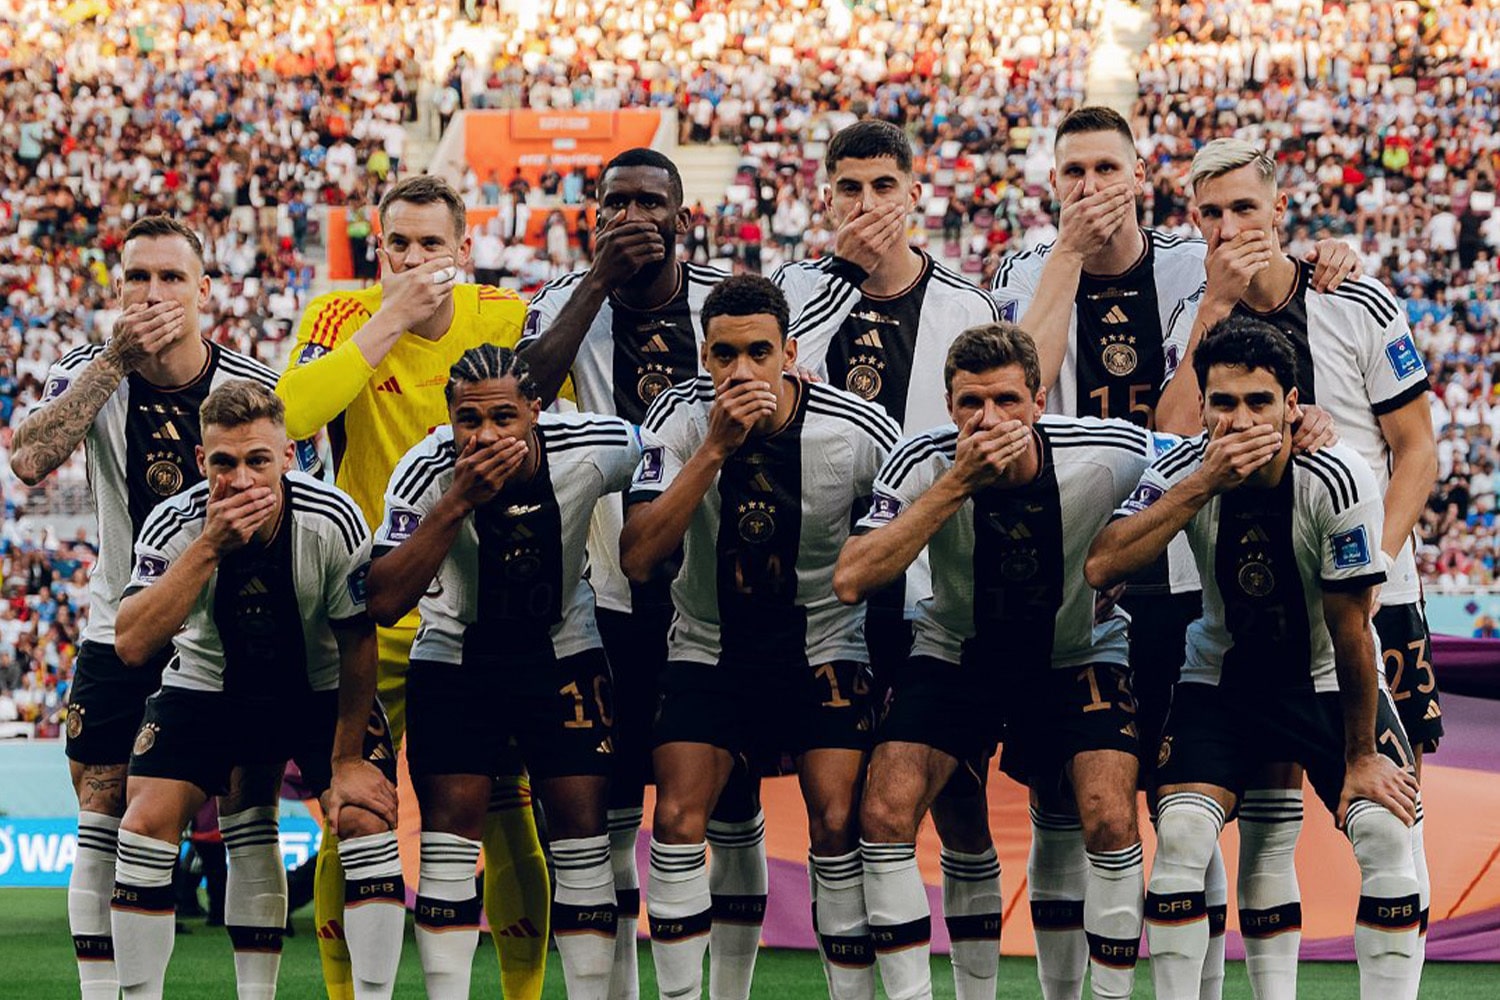 German national team use hands to cover their mouths in protest of FIFA sanctions ahead of World Cup in Qatar